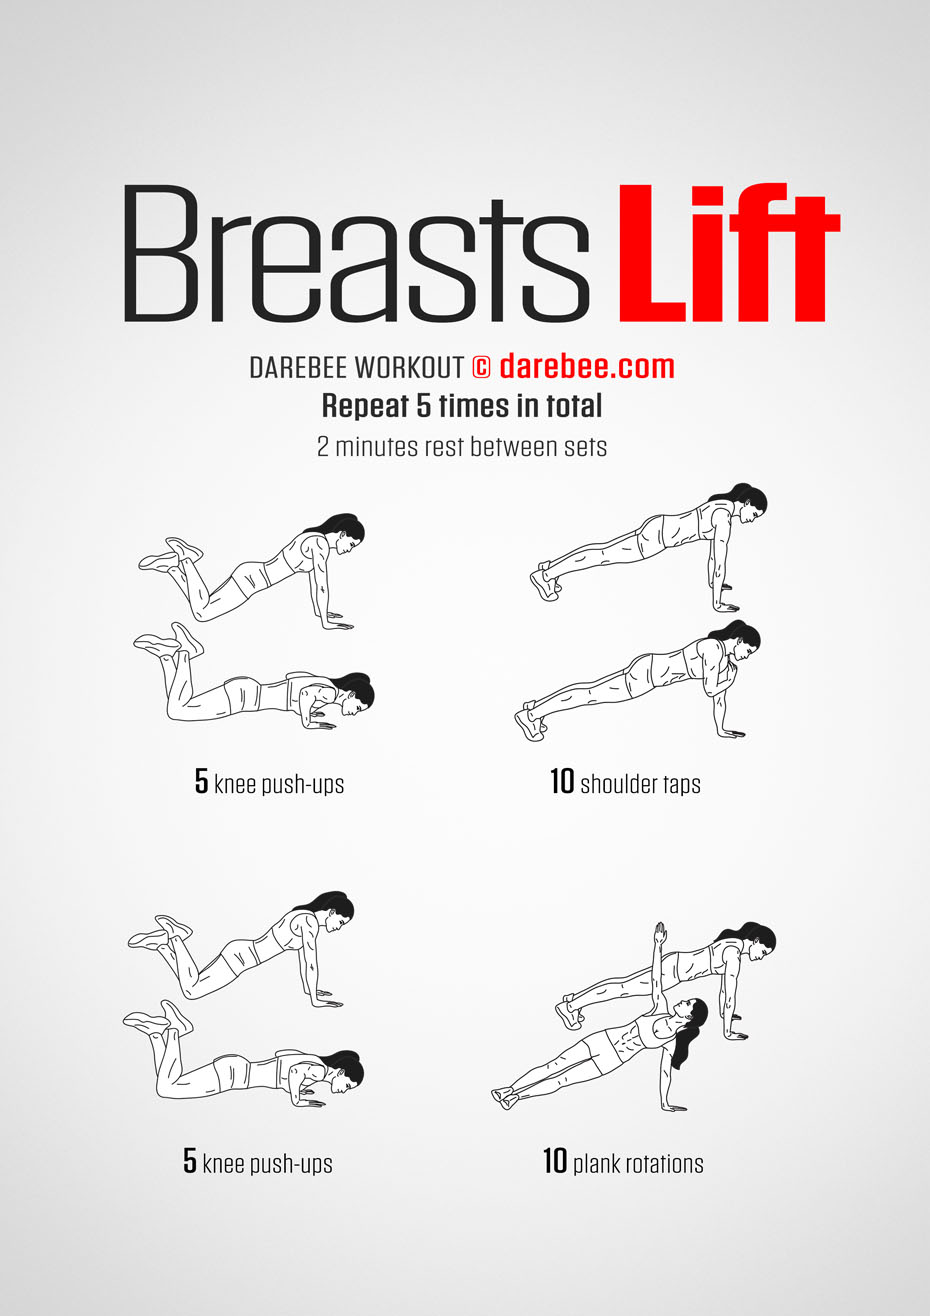 Breasts Lift Workout